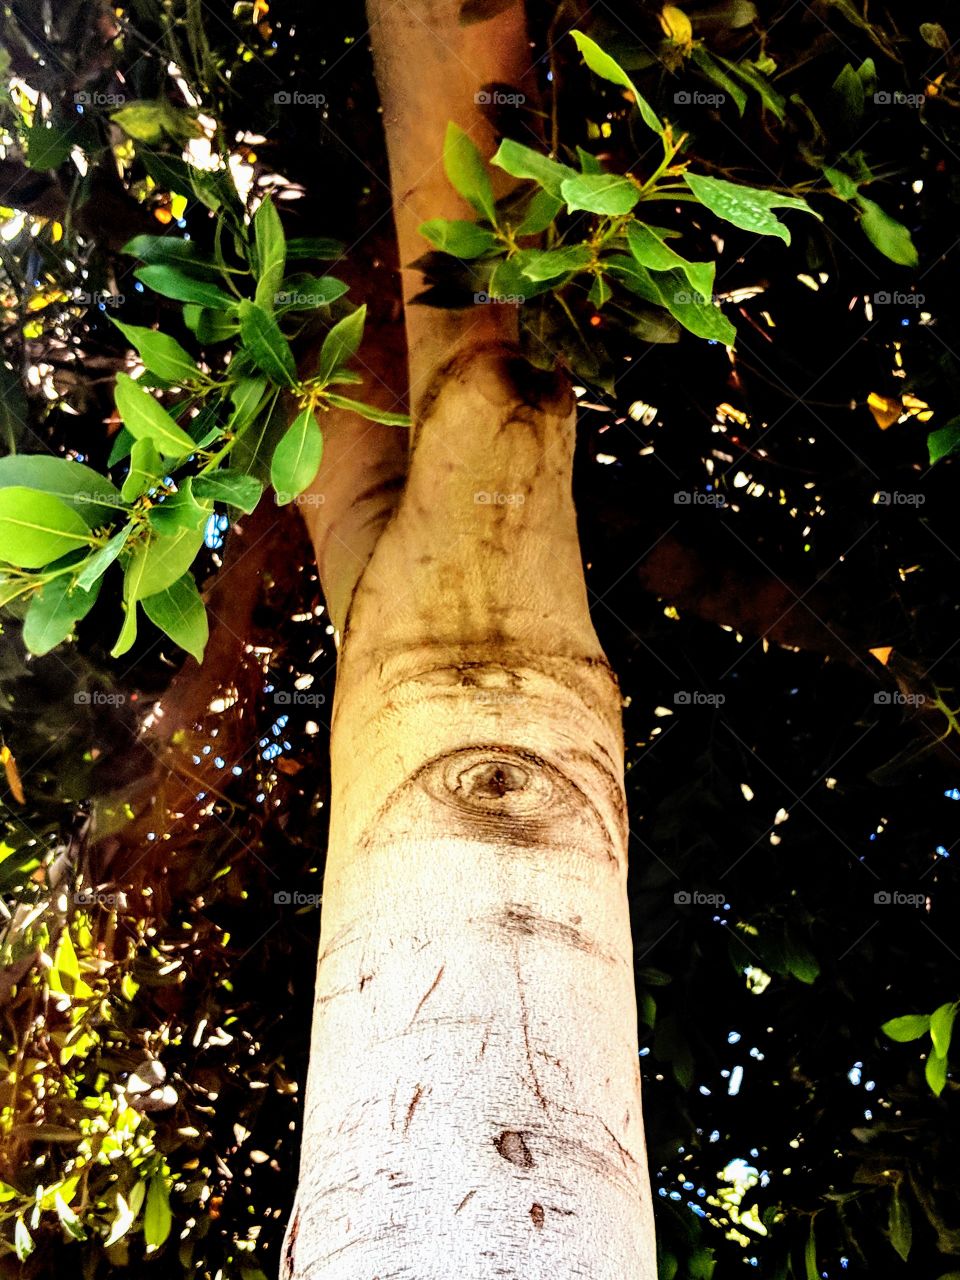 The eye of nature is watching you.... lol